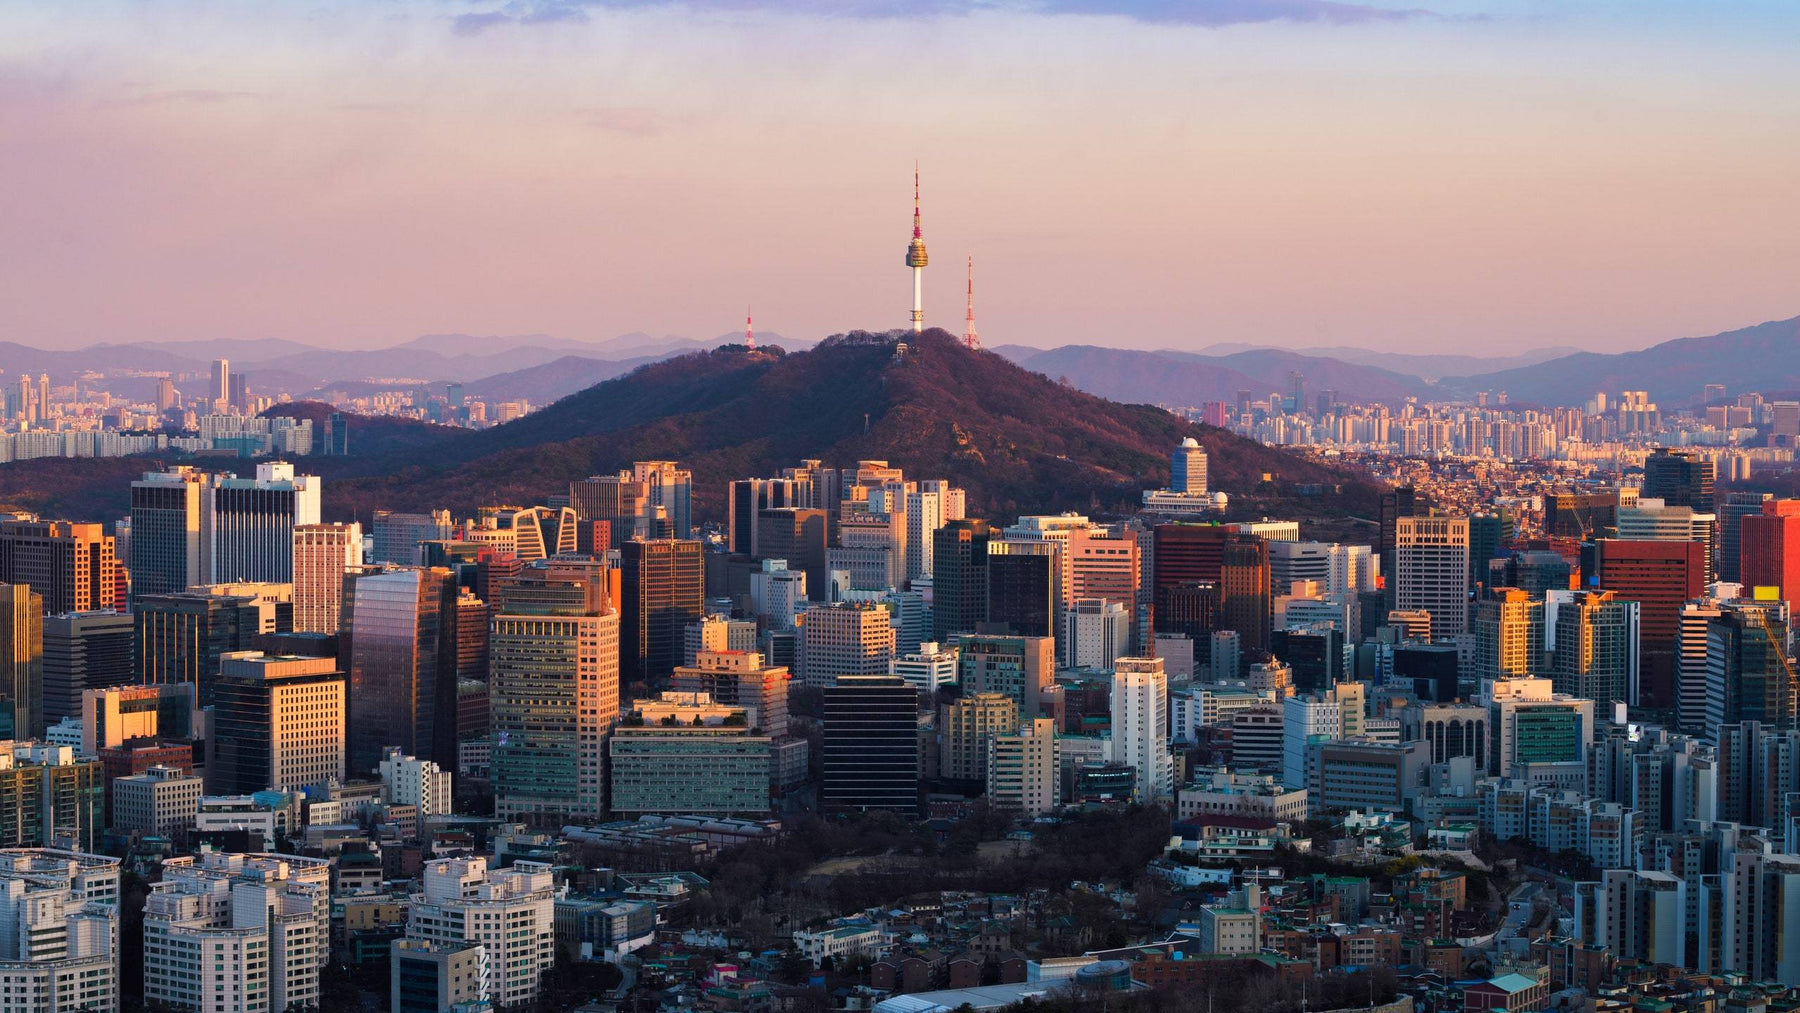 Top 10 Places to Visit on Your Next Trip to Seoul